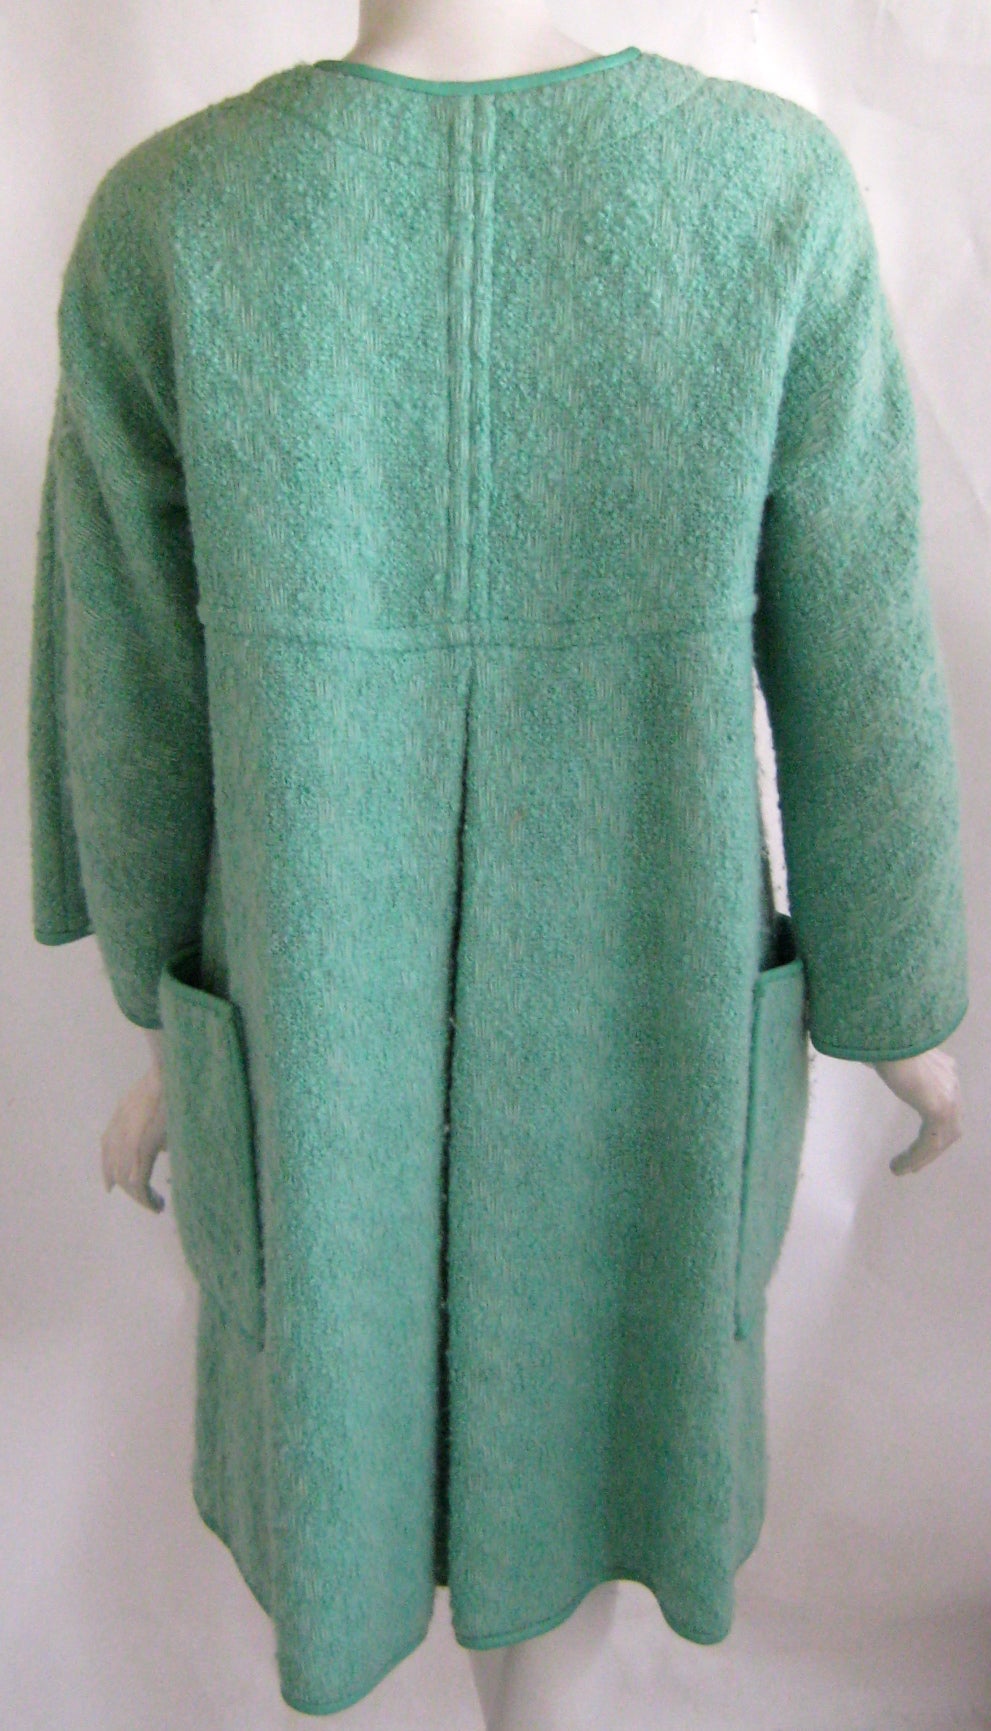 1960s Bonnie Cashin Aqua Boucle Wool Coat In Excellent Condition For Sale In Chicago, IL